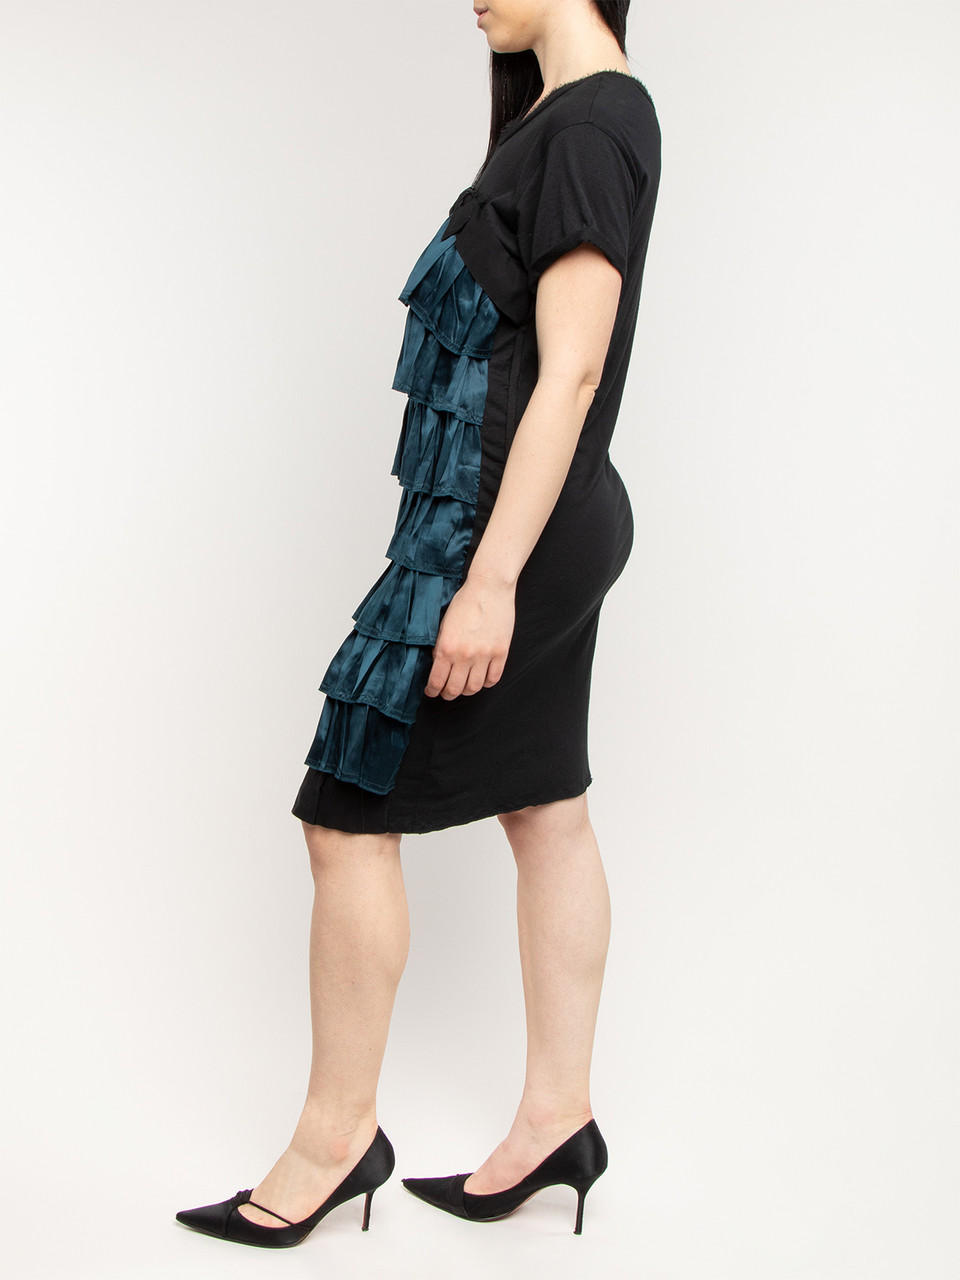 Lanvin Ruffle Dress with Bow